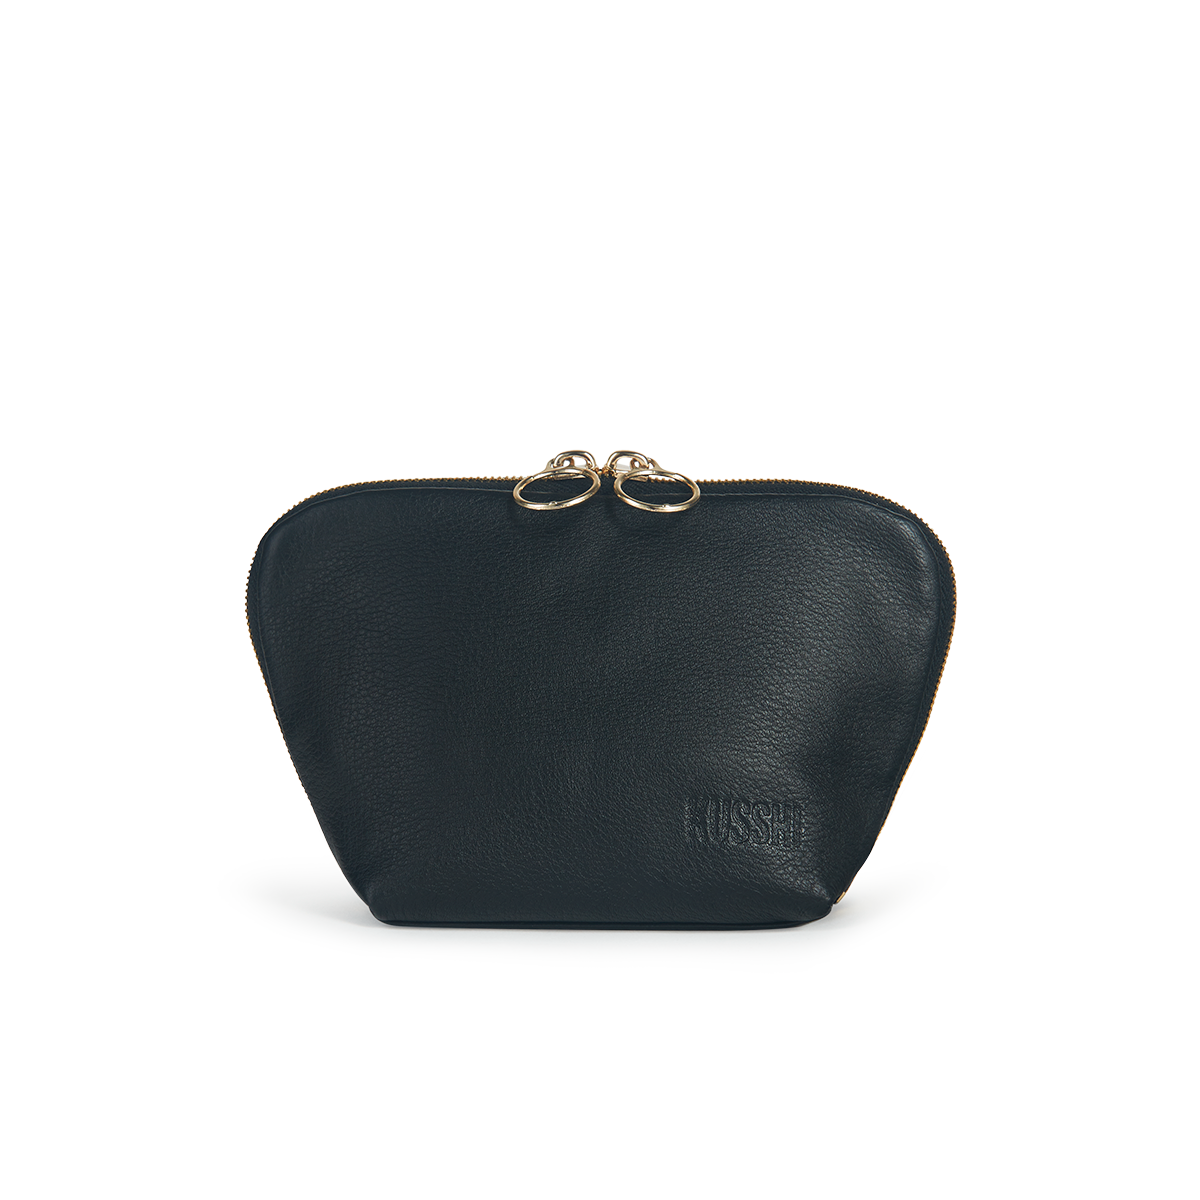 color: Luxurious Black Leather with Pink Interior; alt: Everyday Small Size Makeup Bag | KUSSHI